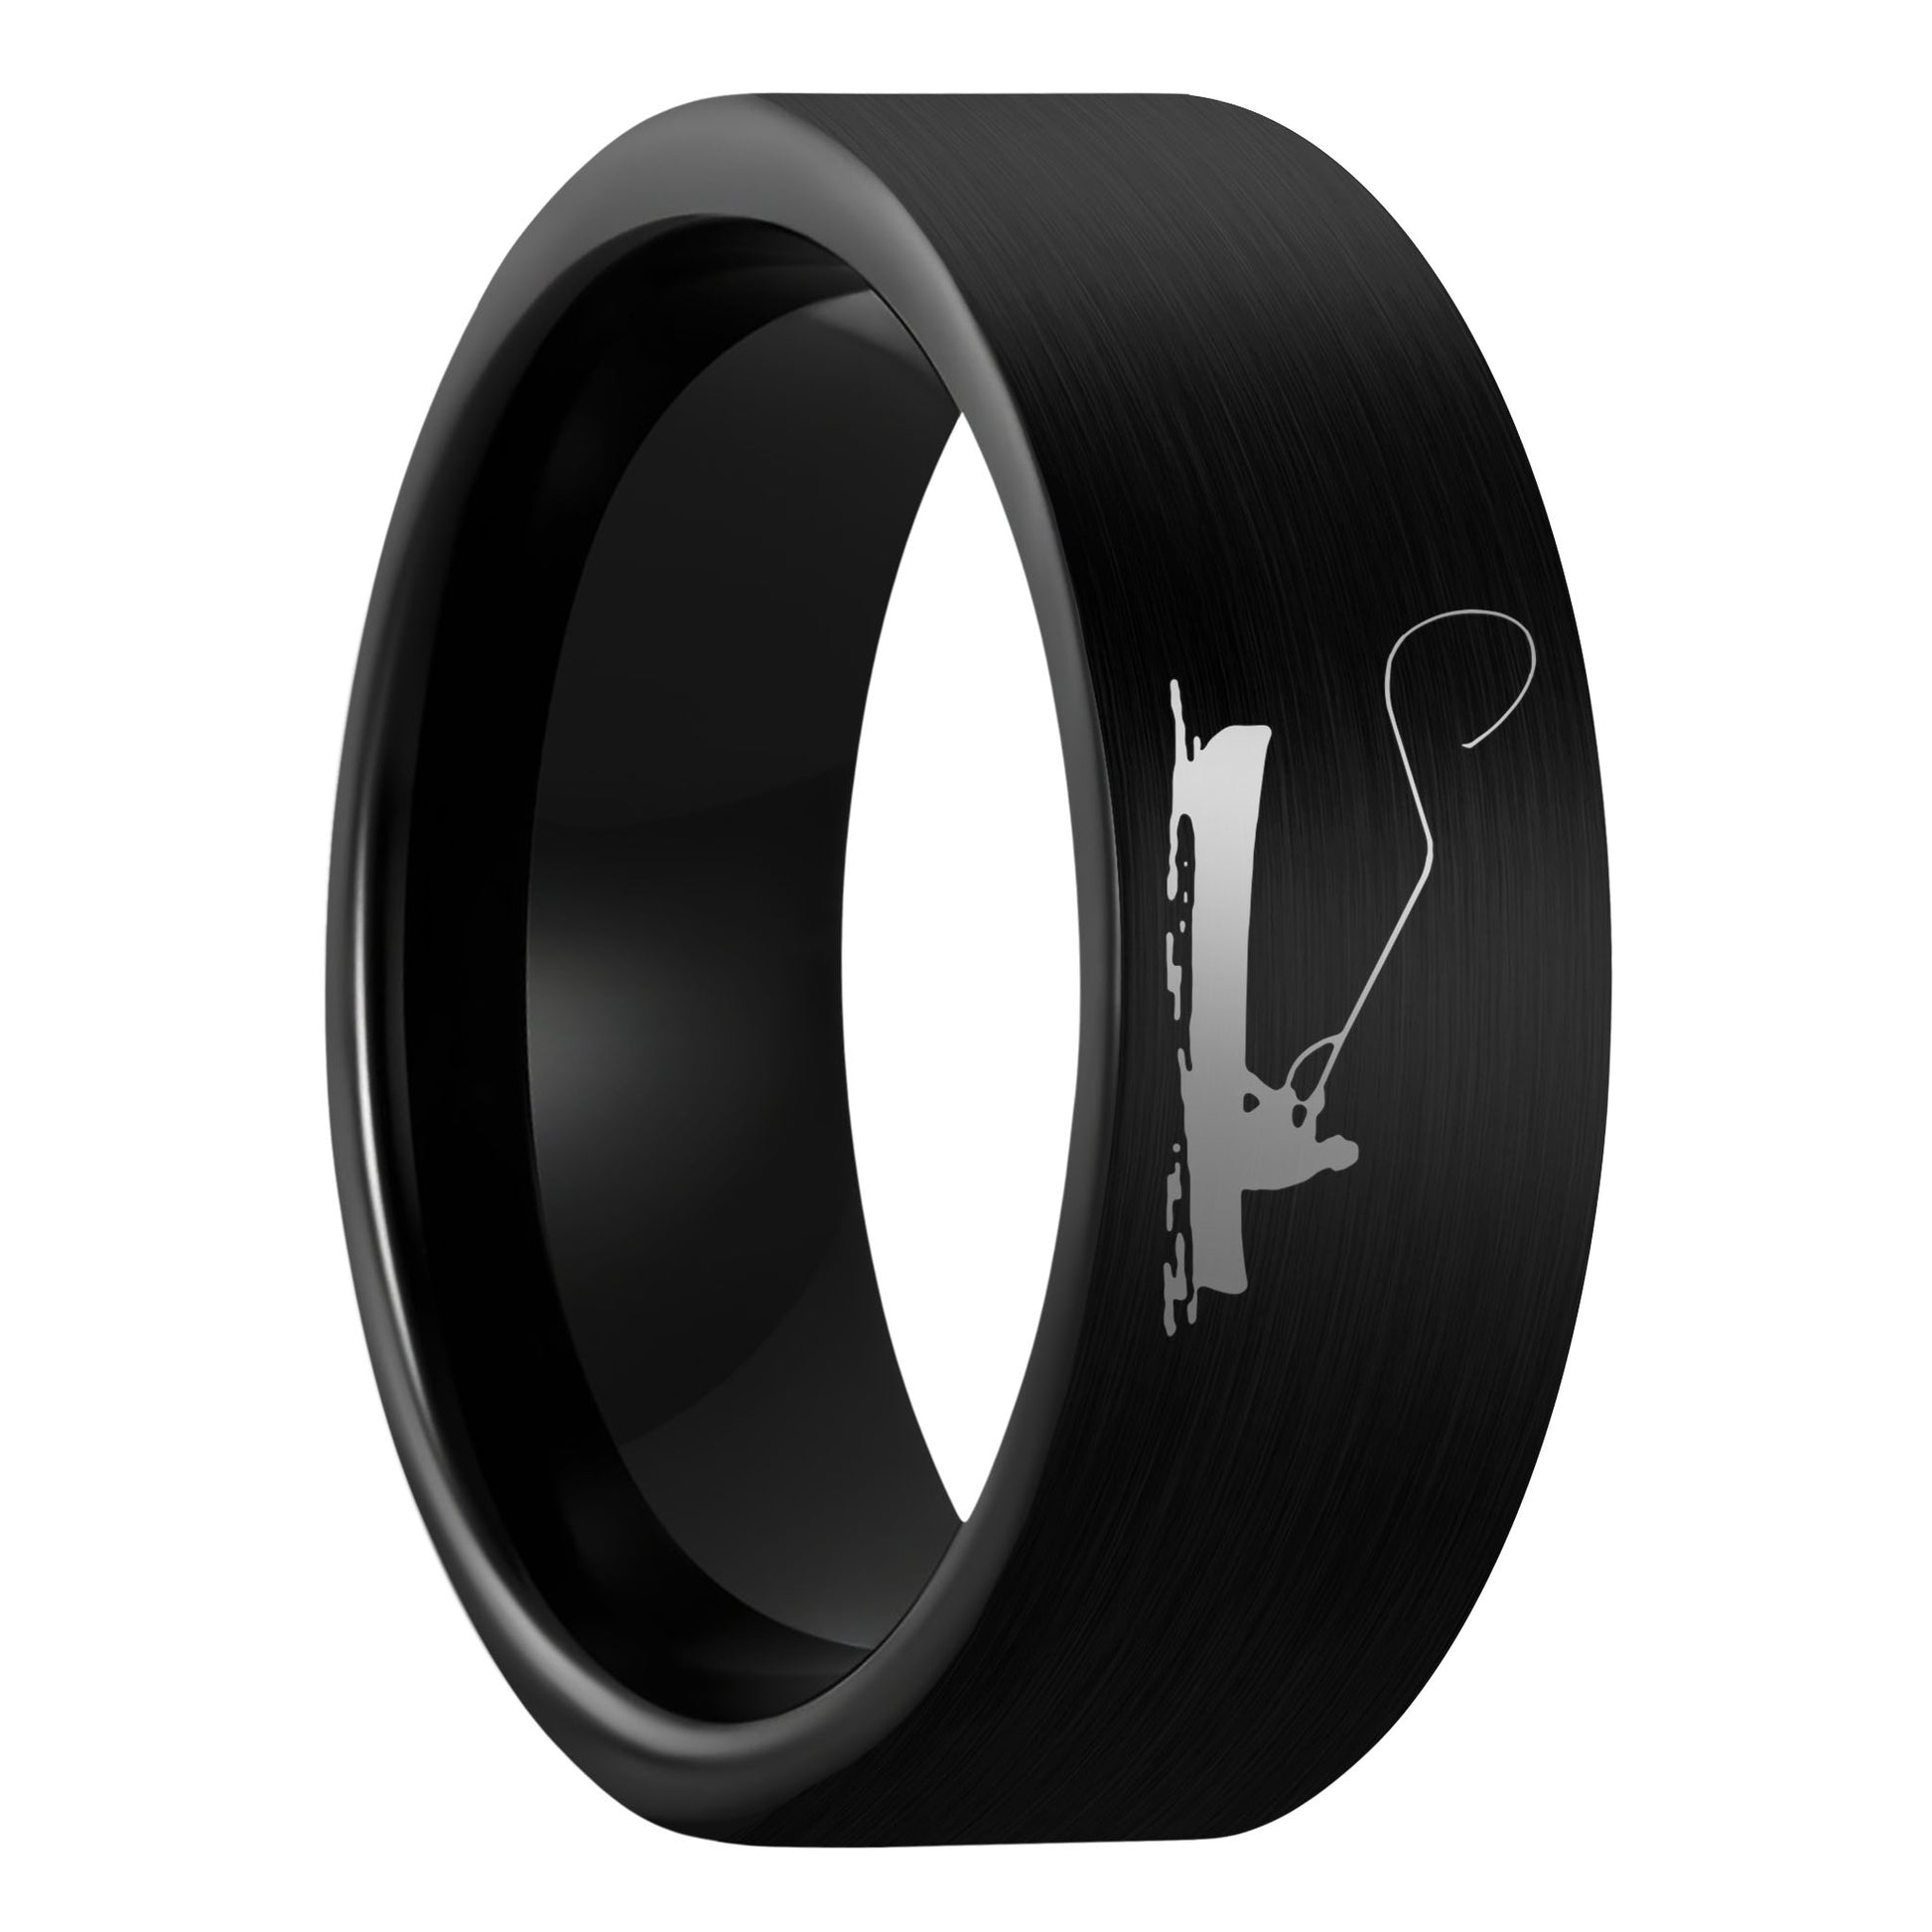 A fisherman boat scene brushed black tungsten men's wedding band displayed on a plain white background.